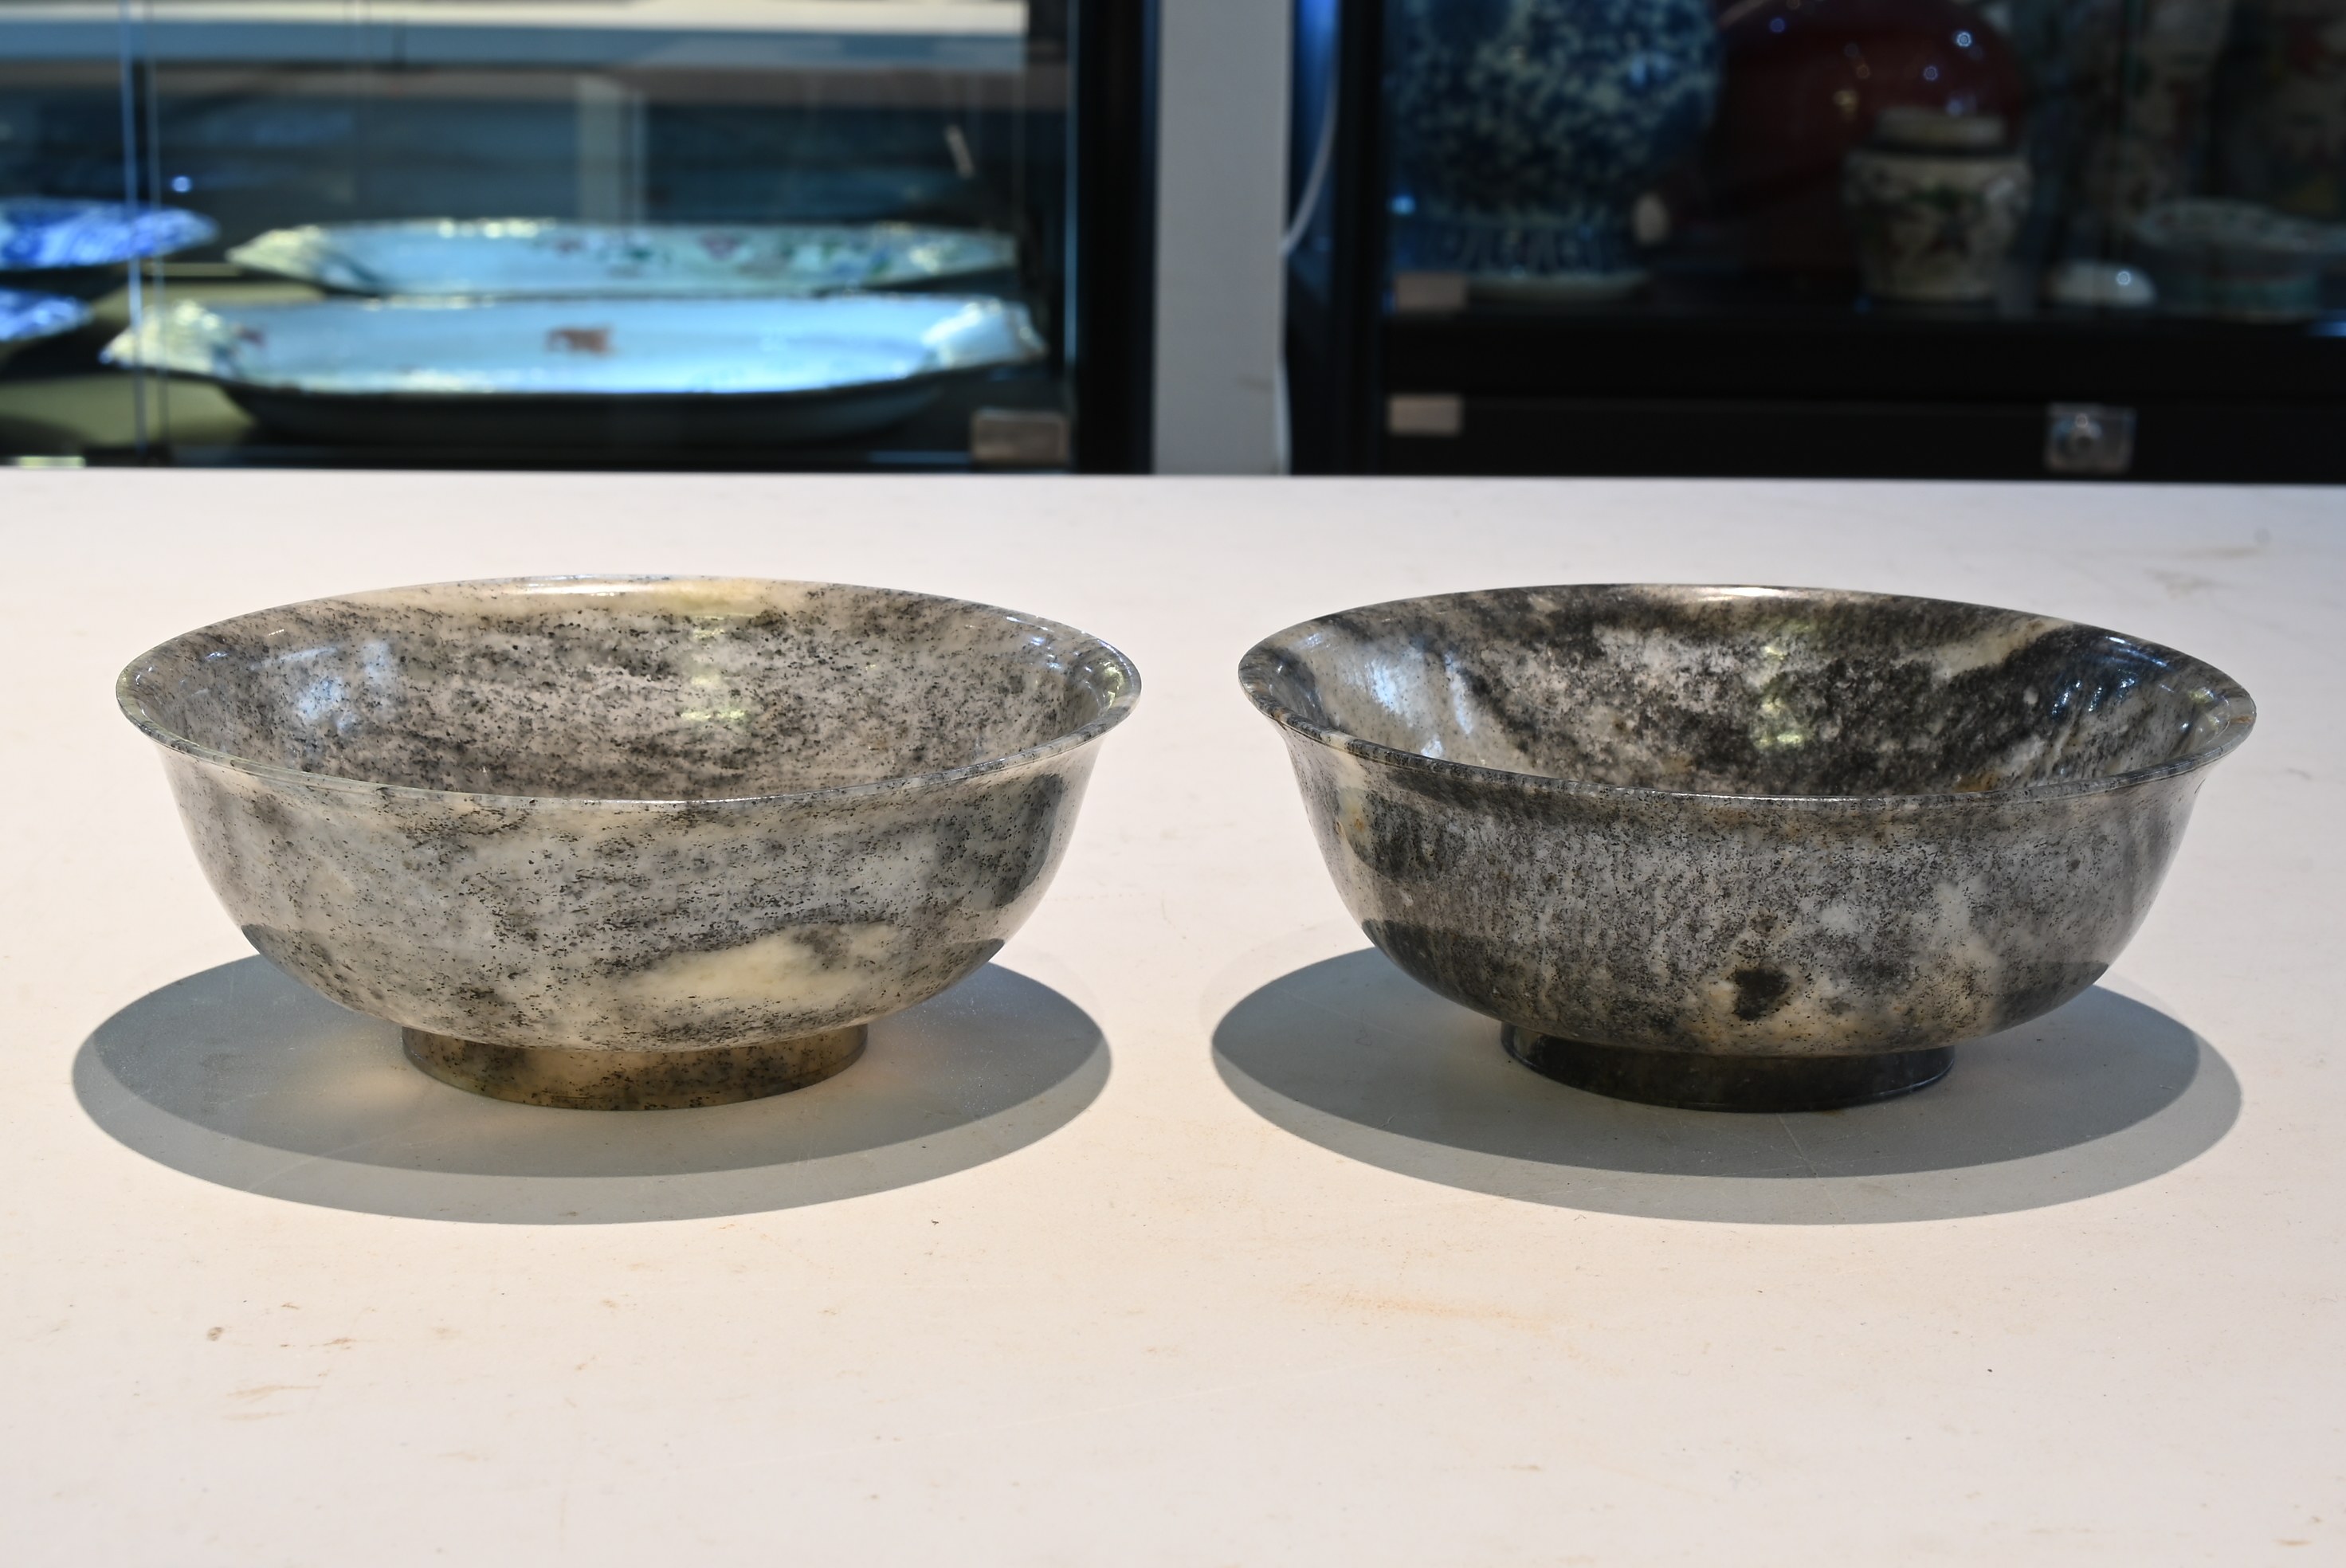 A FINE AND RARE PAIR OF CHINESE BLACK AND WHITE STRIATED NEPHRITE JADE BOWLS, 18/19TH CENTURY. - Image 32 of 32